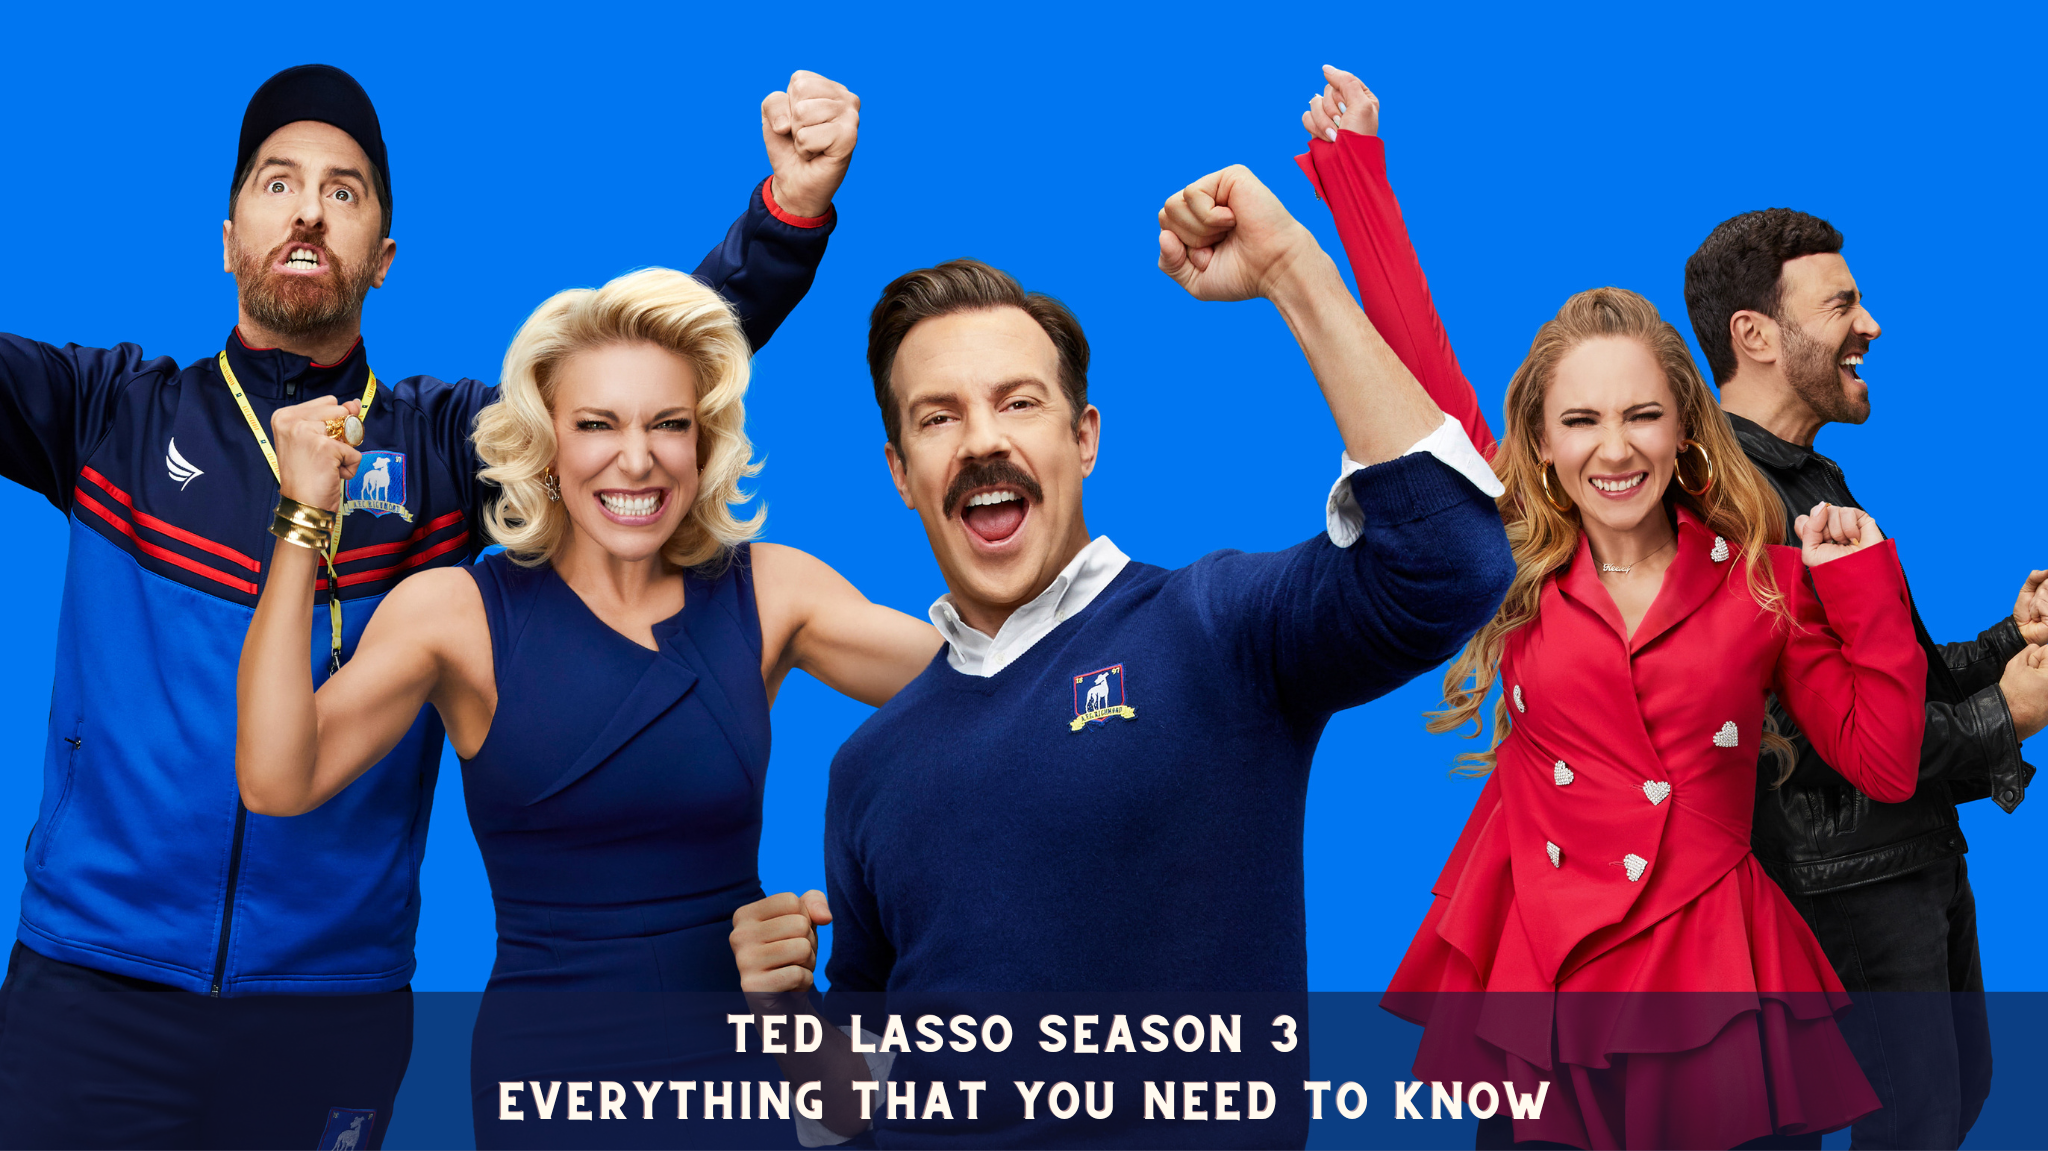 Ted Lasso Season 3: Everything That You Need To Know